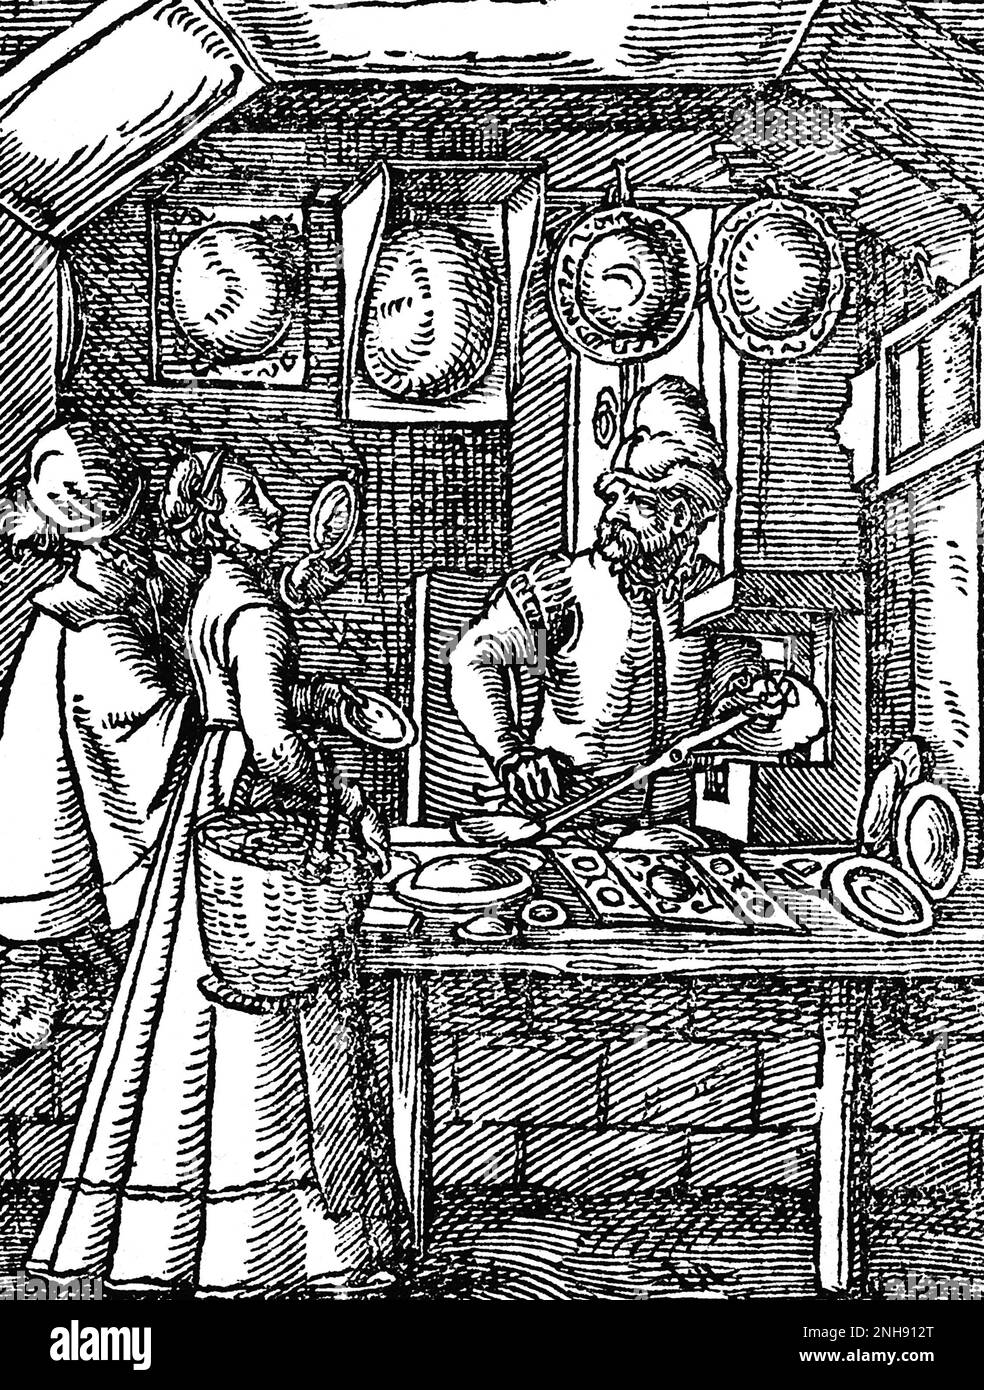 A mirror maker in his workshop, with convex mirrors on display and two customers trying out hand-held mirrors. Woodcut from Jost Amman's Book of Trades, 1568. Stock Photo